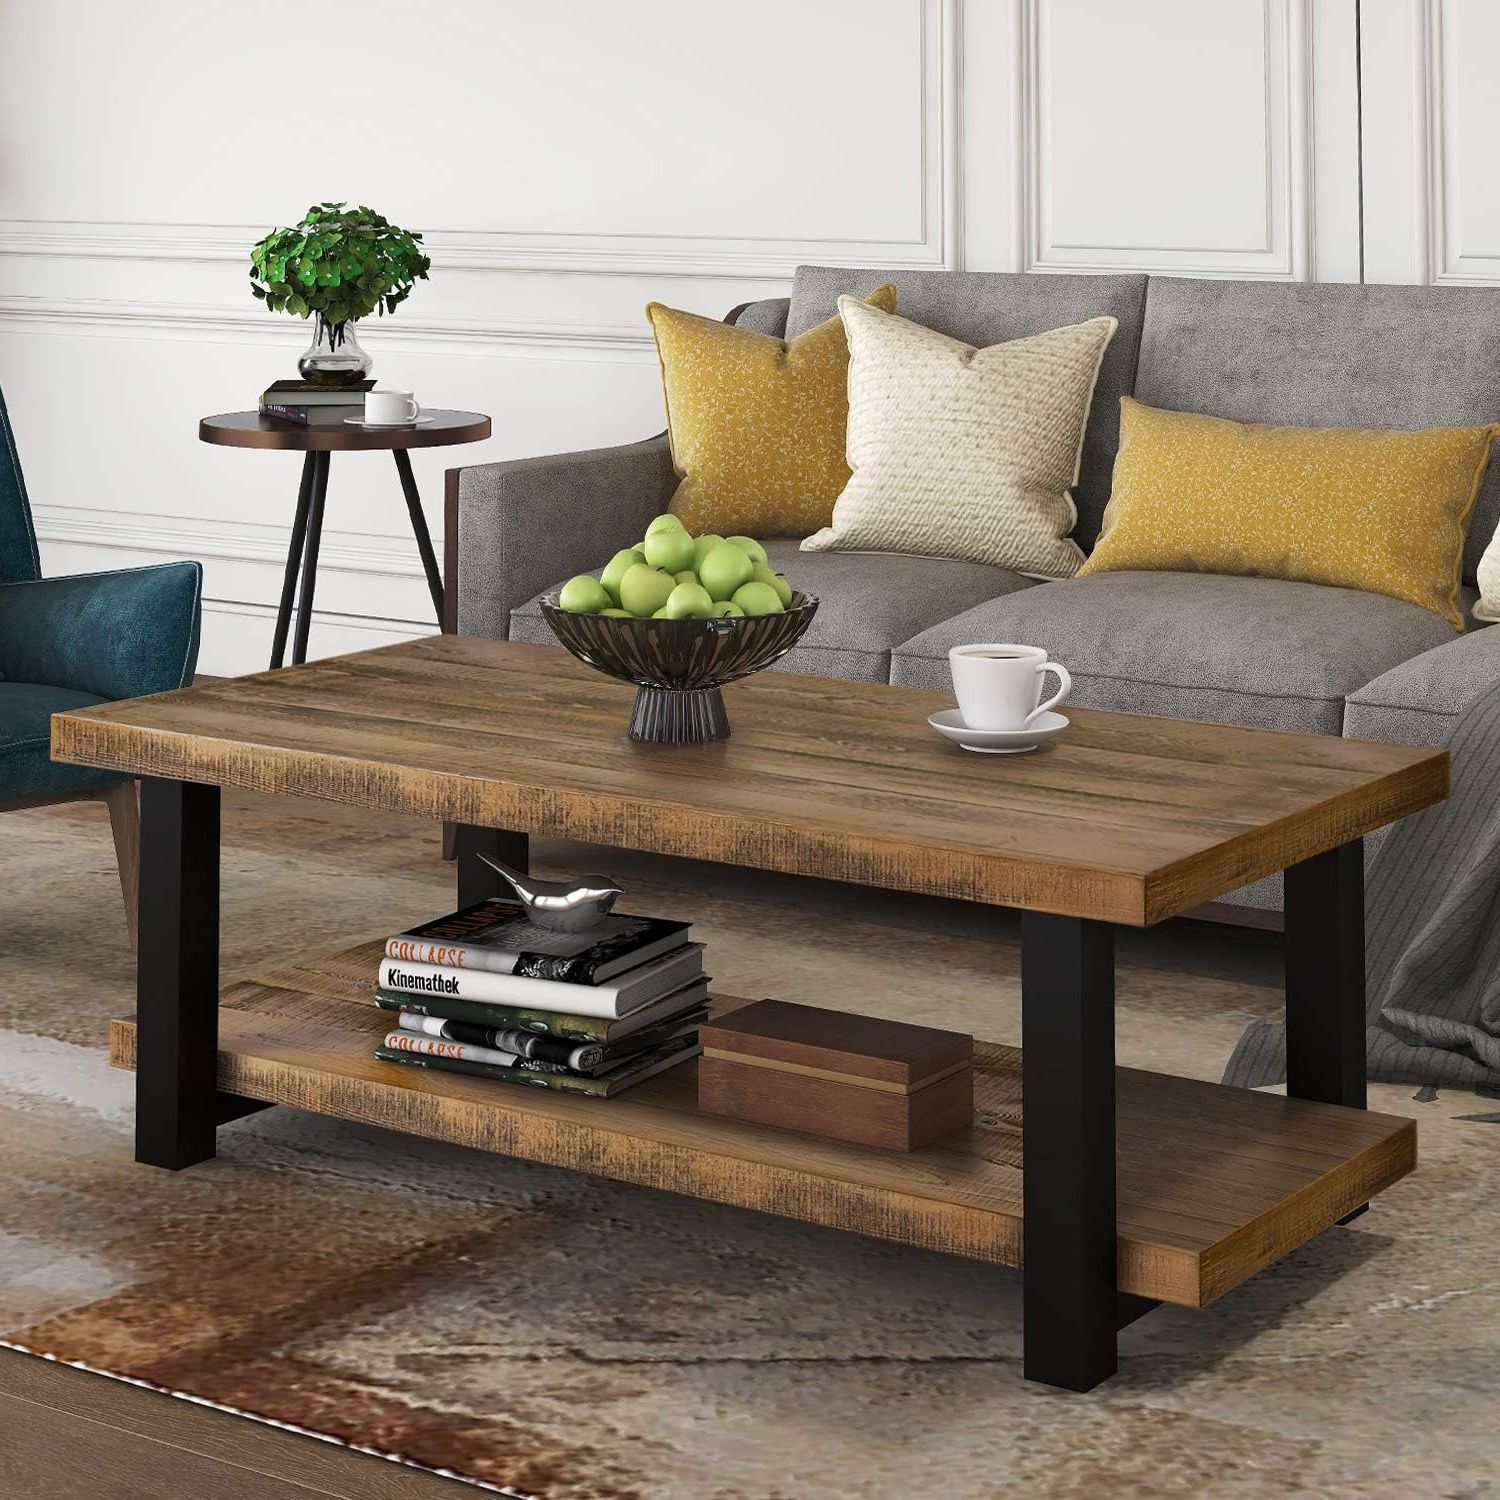 Most Recent Amazon: Knocbel Farmhouse Coffee Table For Living Room, Sofa Side 2 In Metal 1 Shelf Coffee Tables (View 5 of 15)